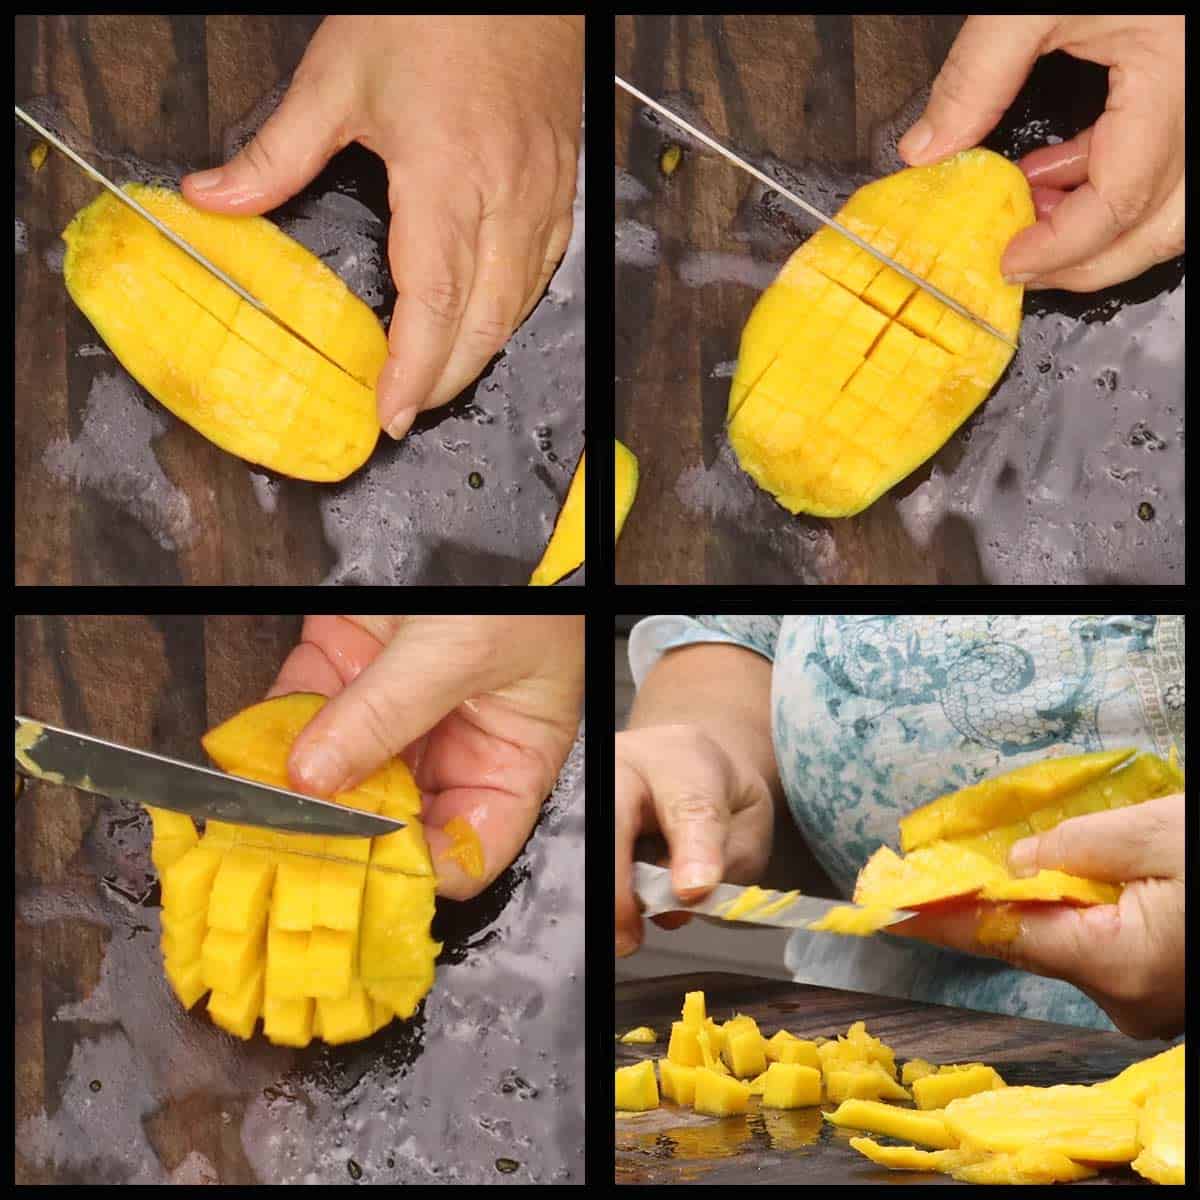 making grid pattern in mango flesh and removing the dices.